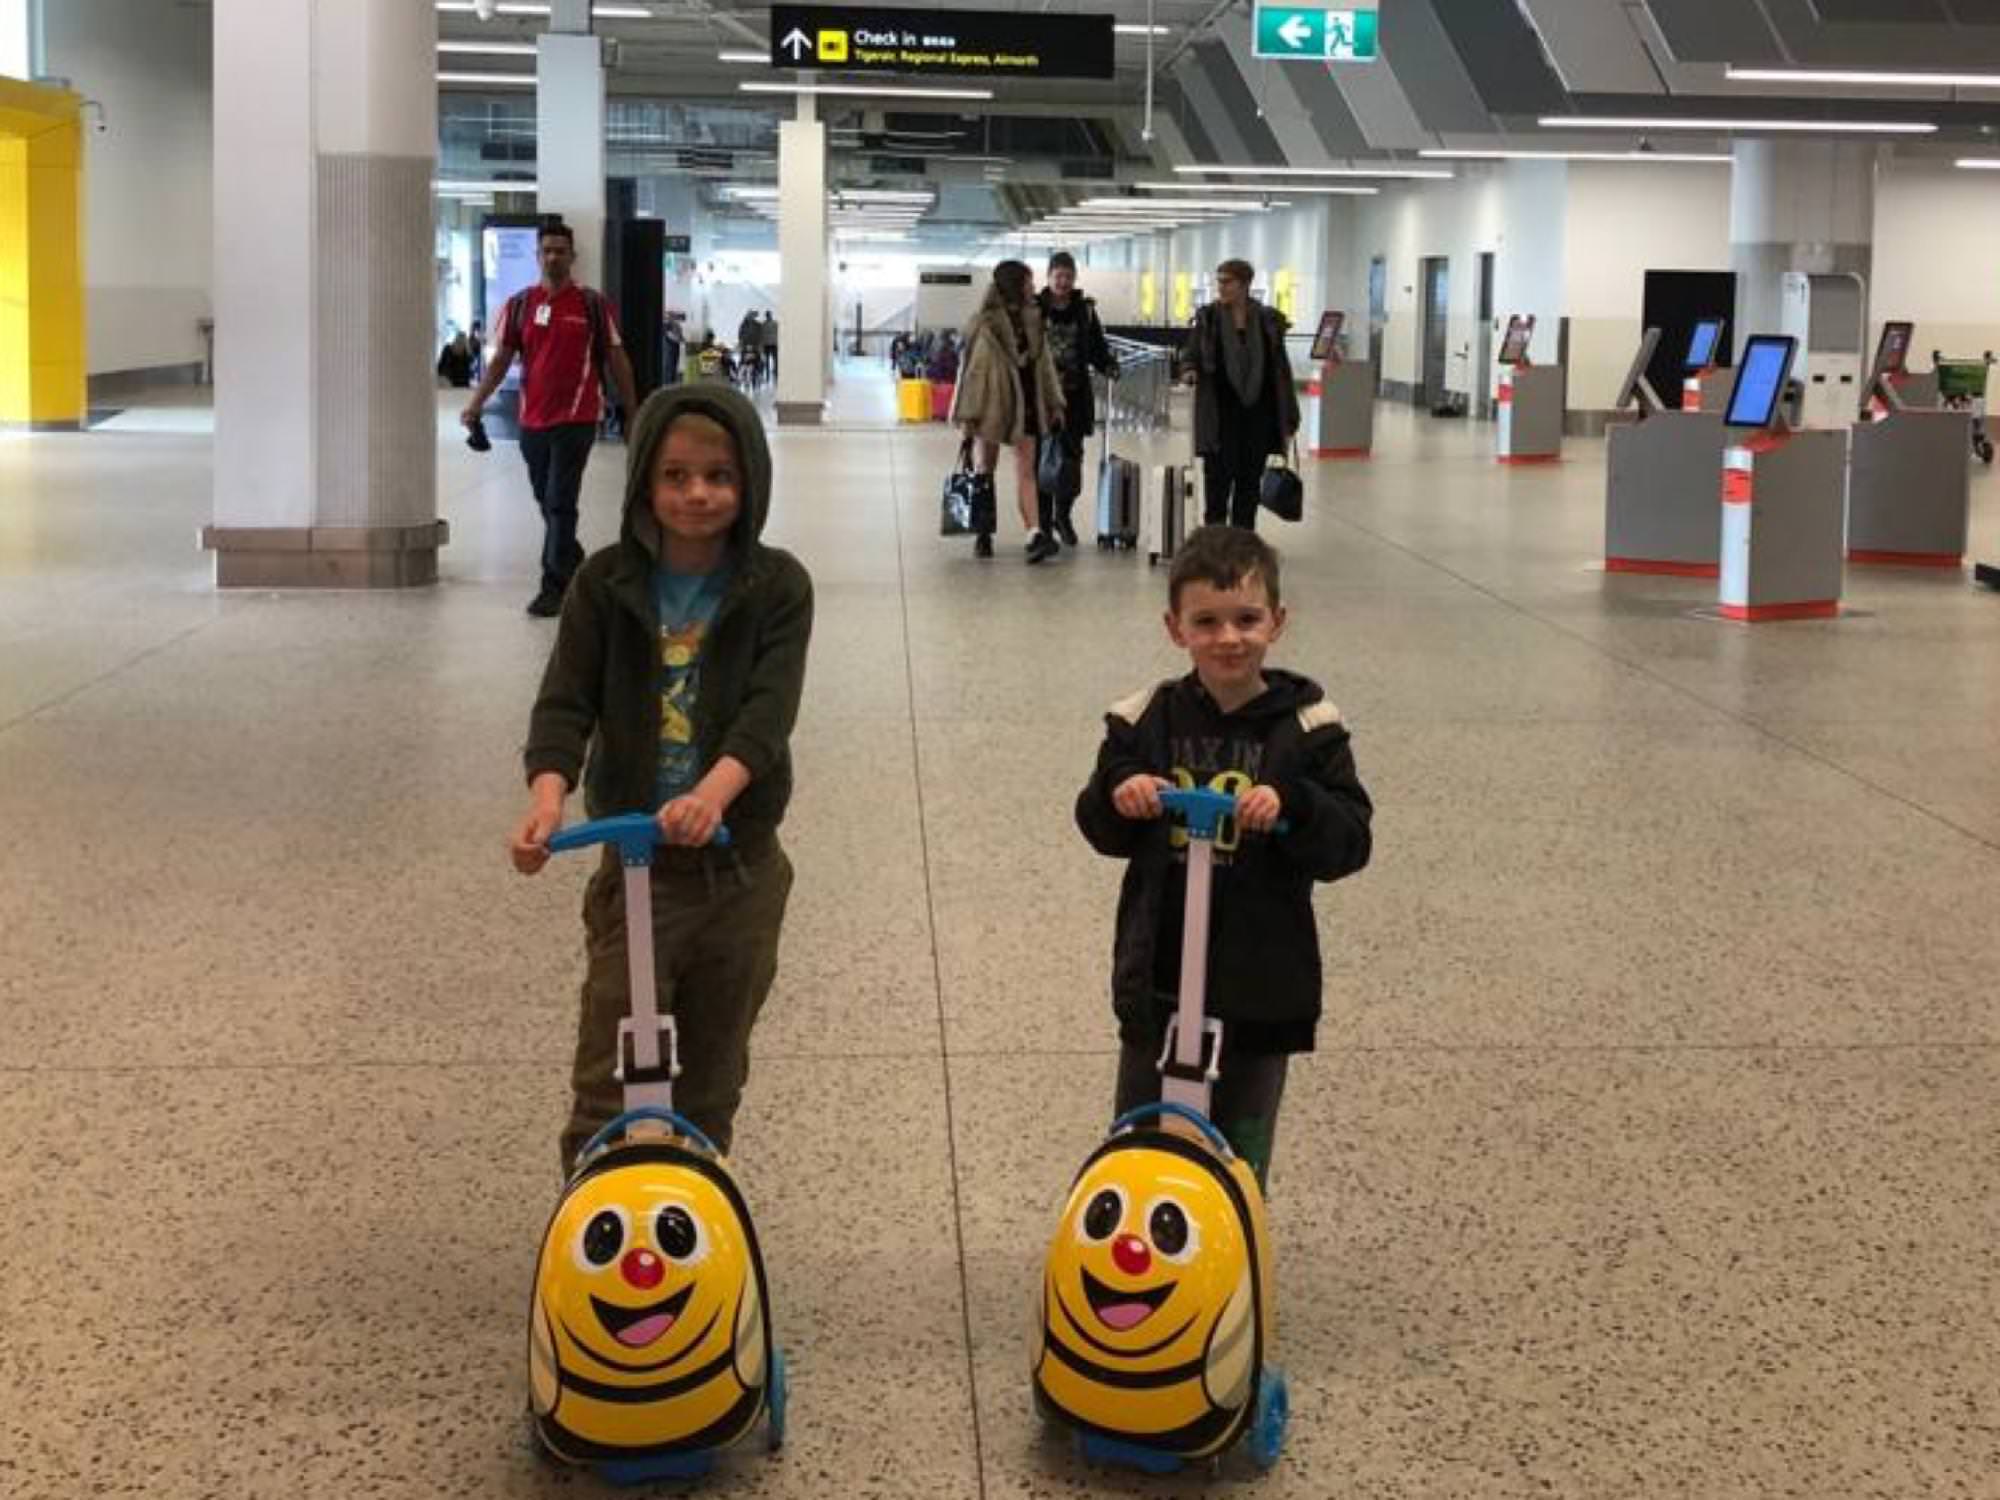 Boys on scooters in airport